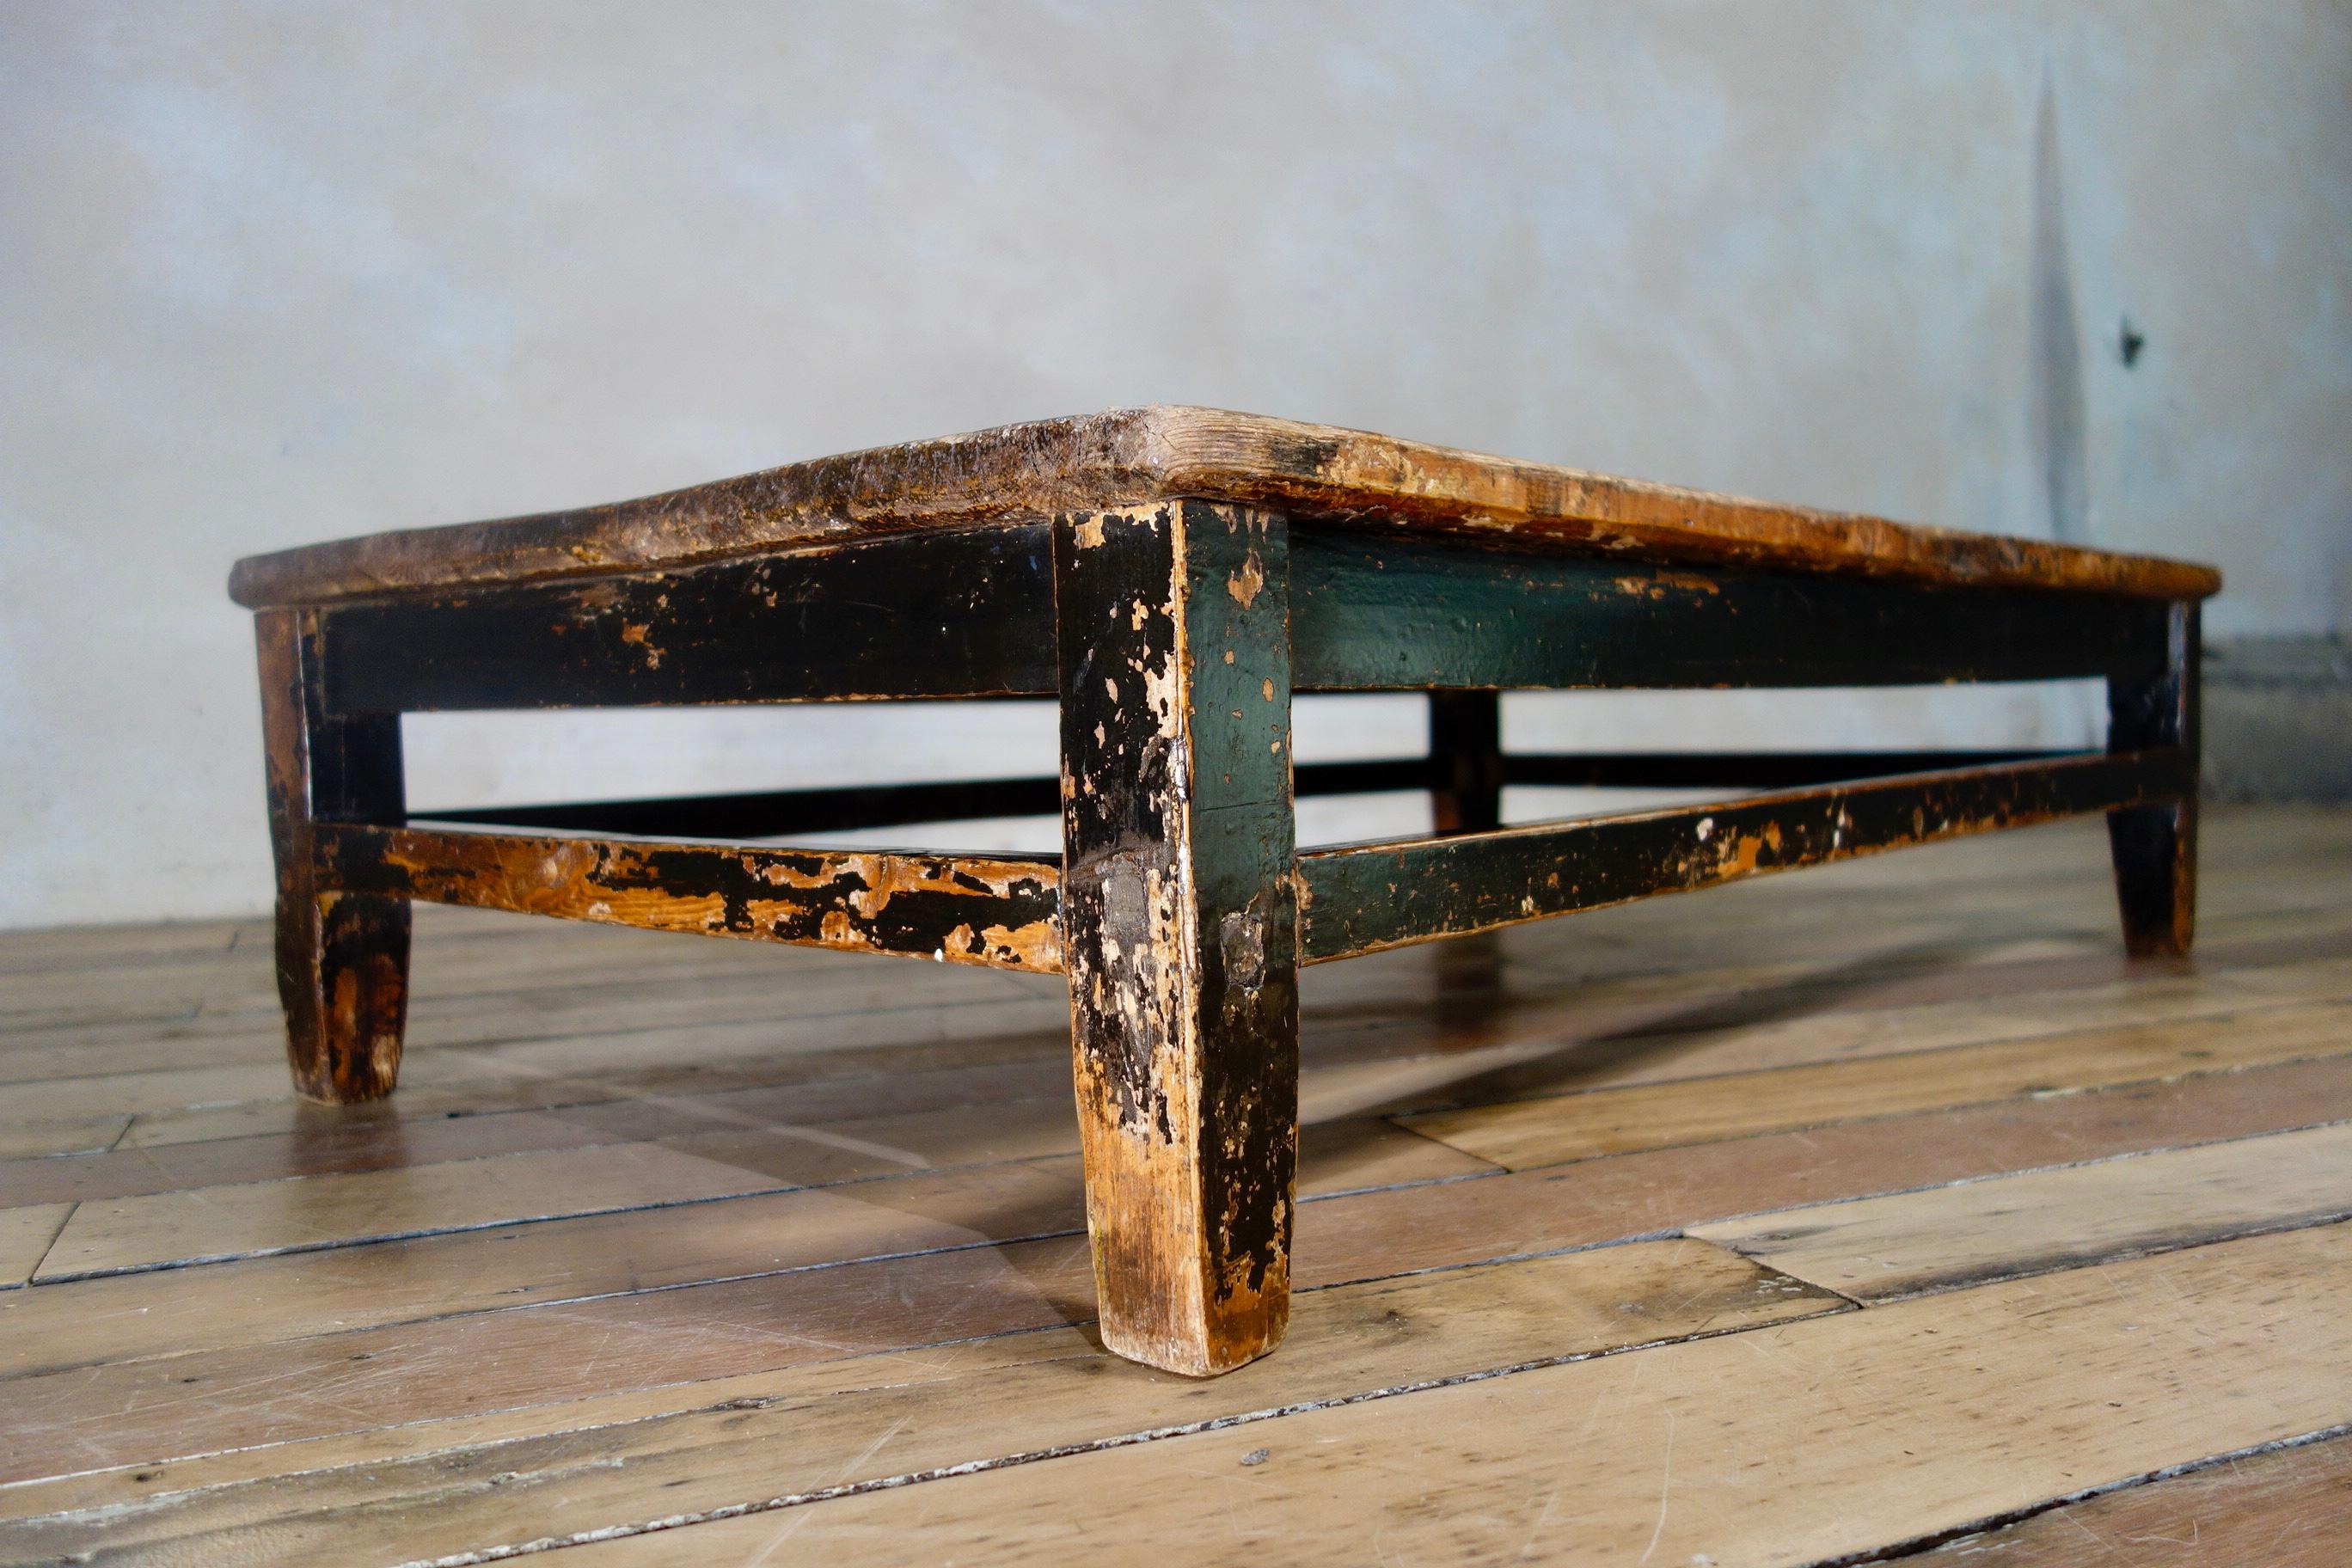 An unusual late 18th century oriental black lacquer coffee table, the overall design appears to be highly influenced from furniture belonging to the 'Ming dynasty' known for its clean, elegant lines with gracefully curved details.

This low coffee